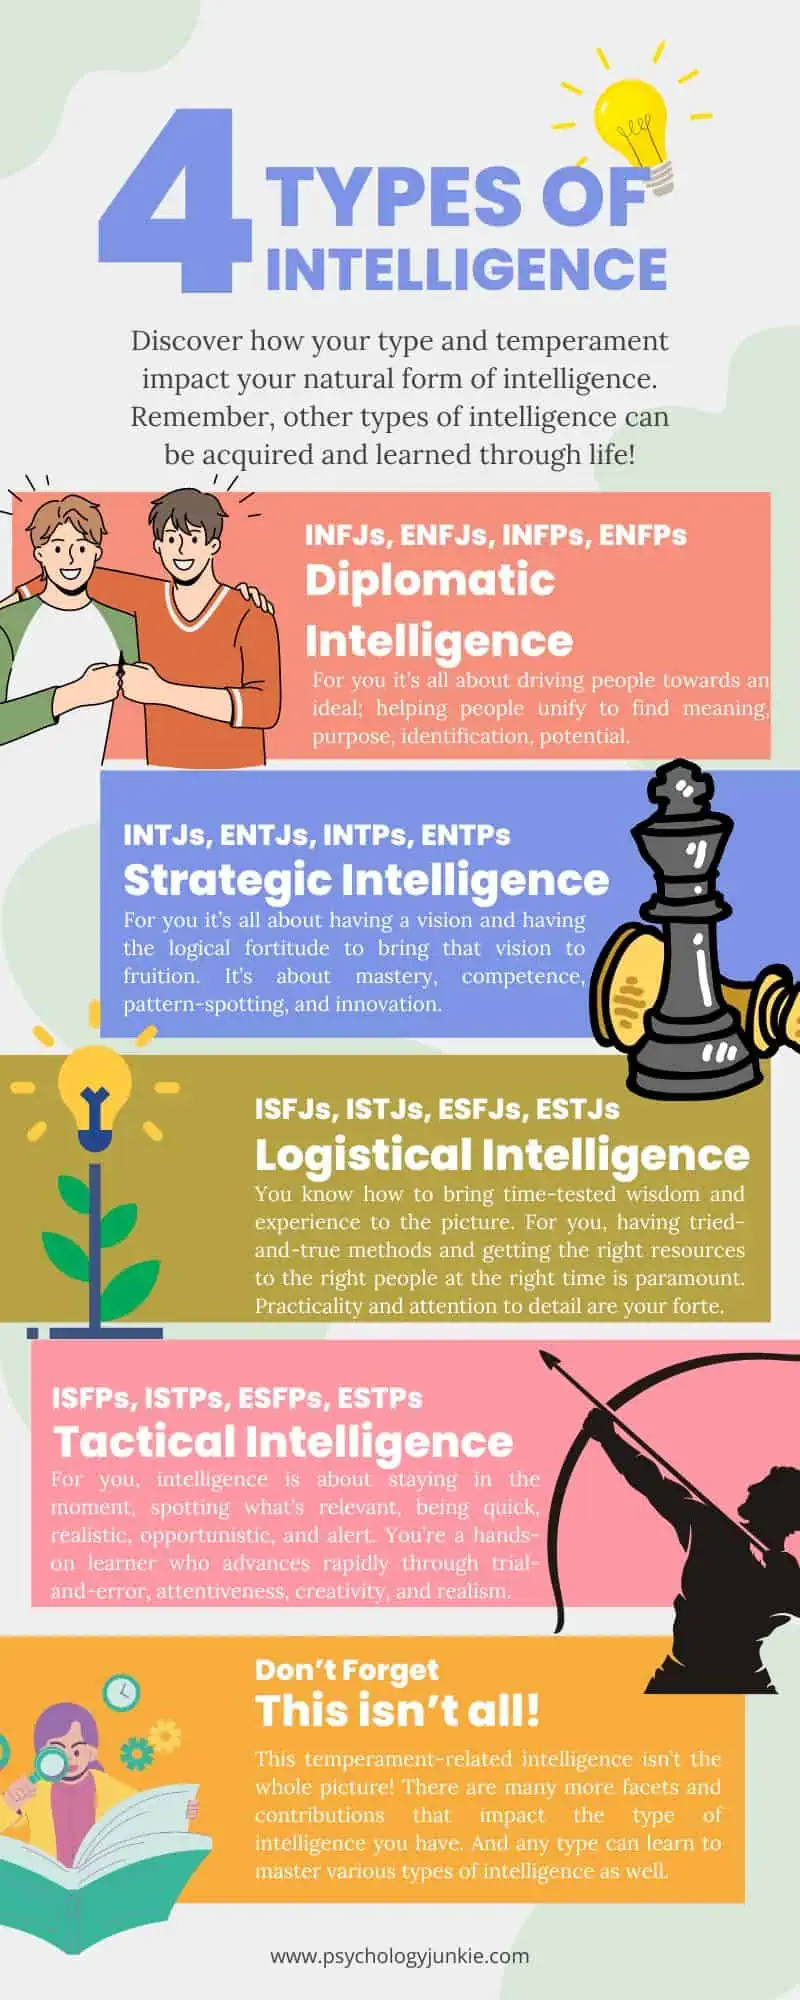 A look at how your Myers-Briggs® personality type impacts your style of intelligence. #MBTI #Personality #INTP